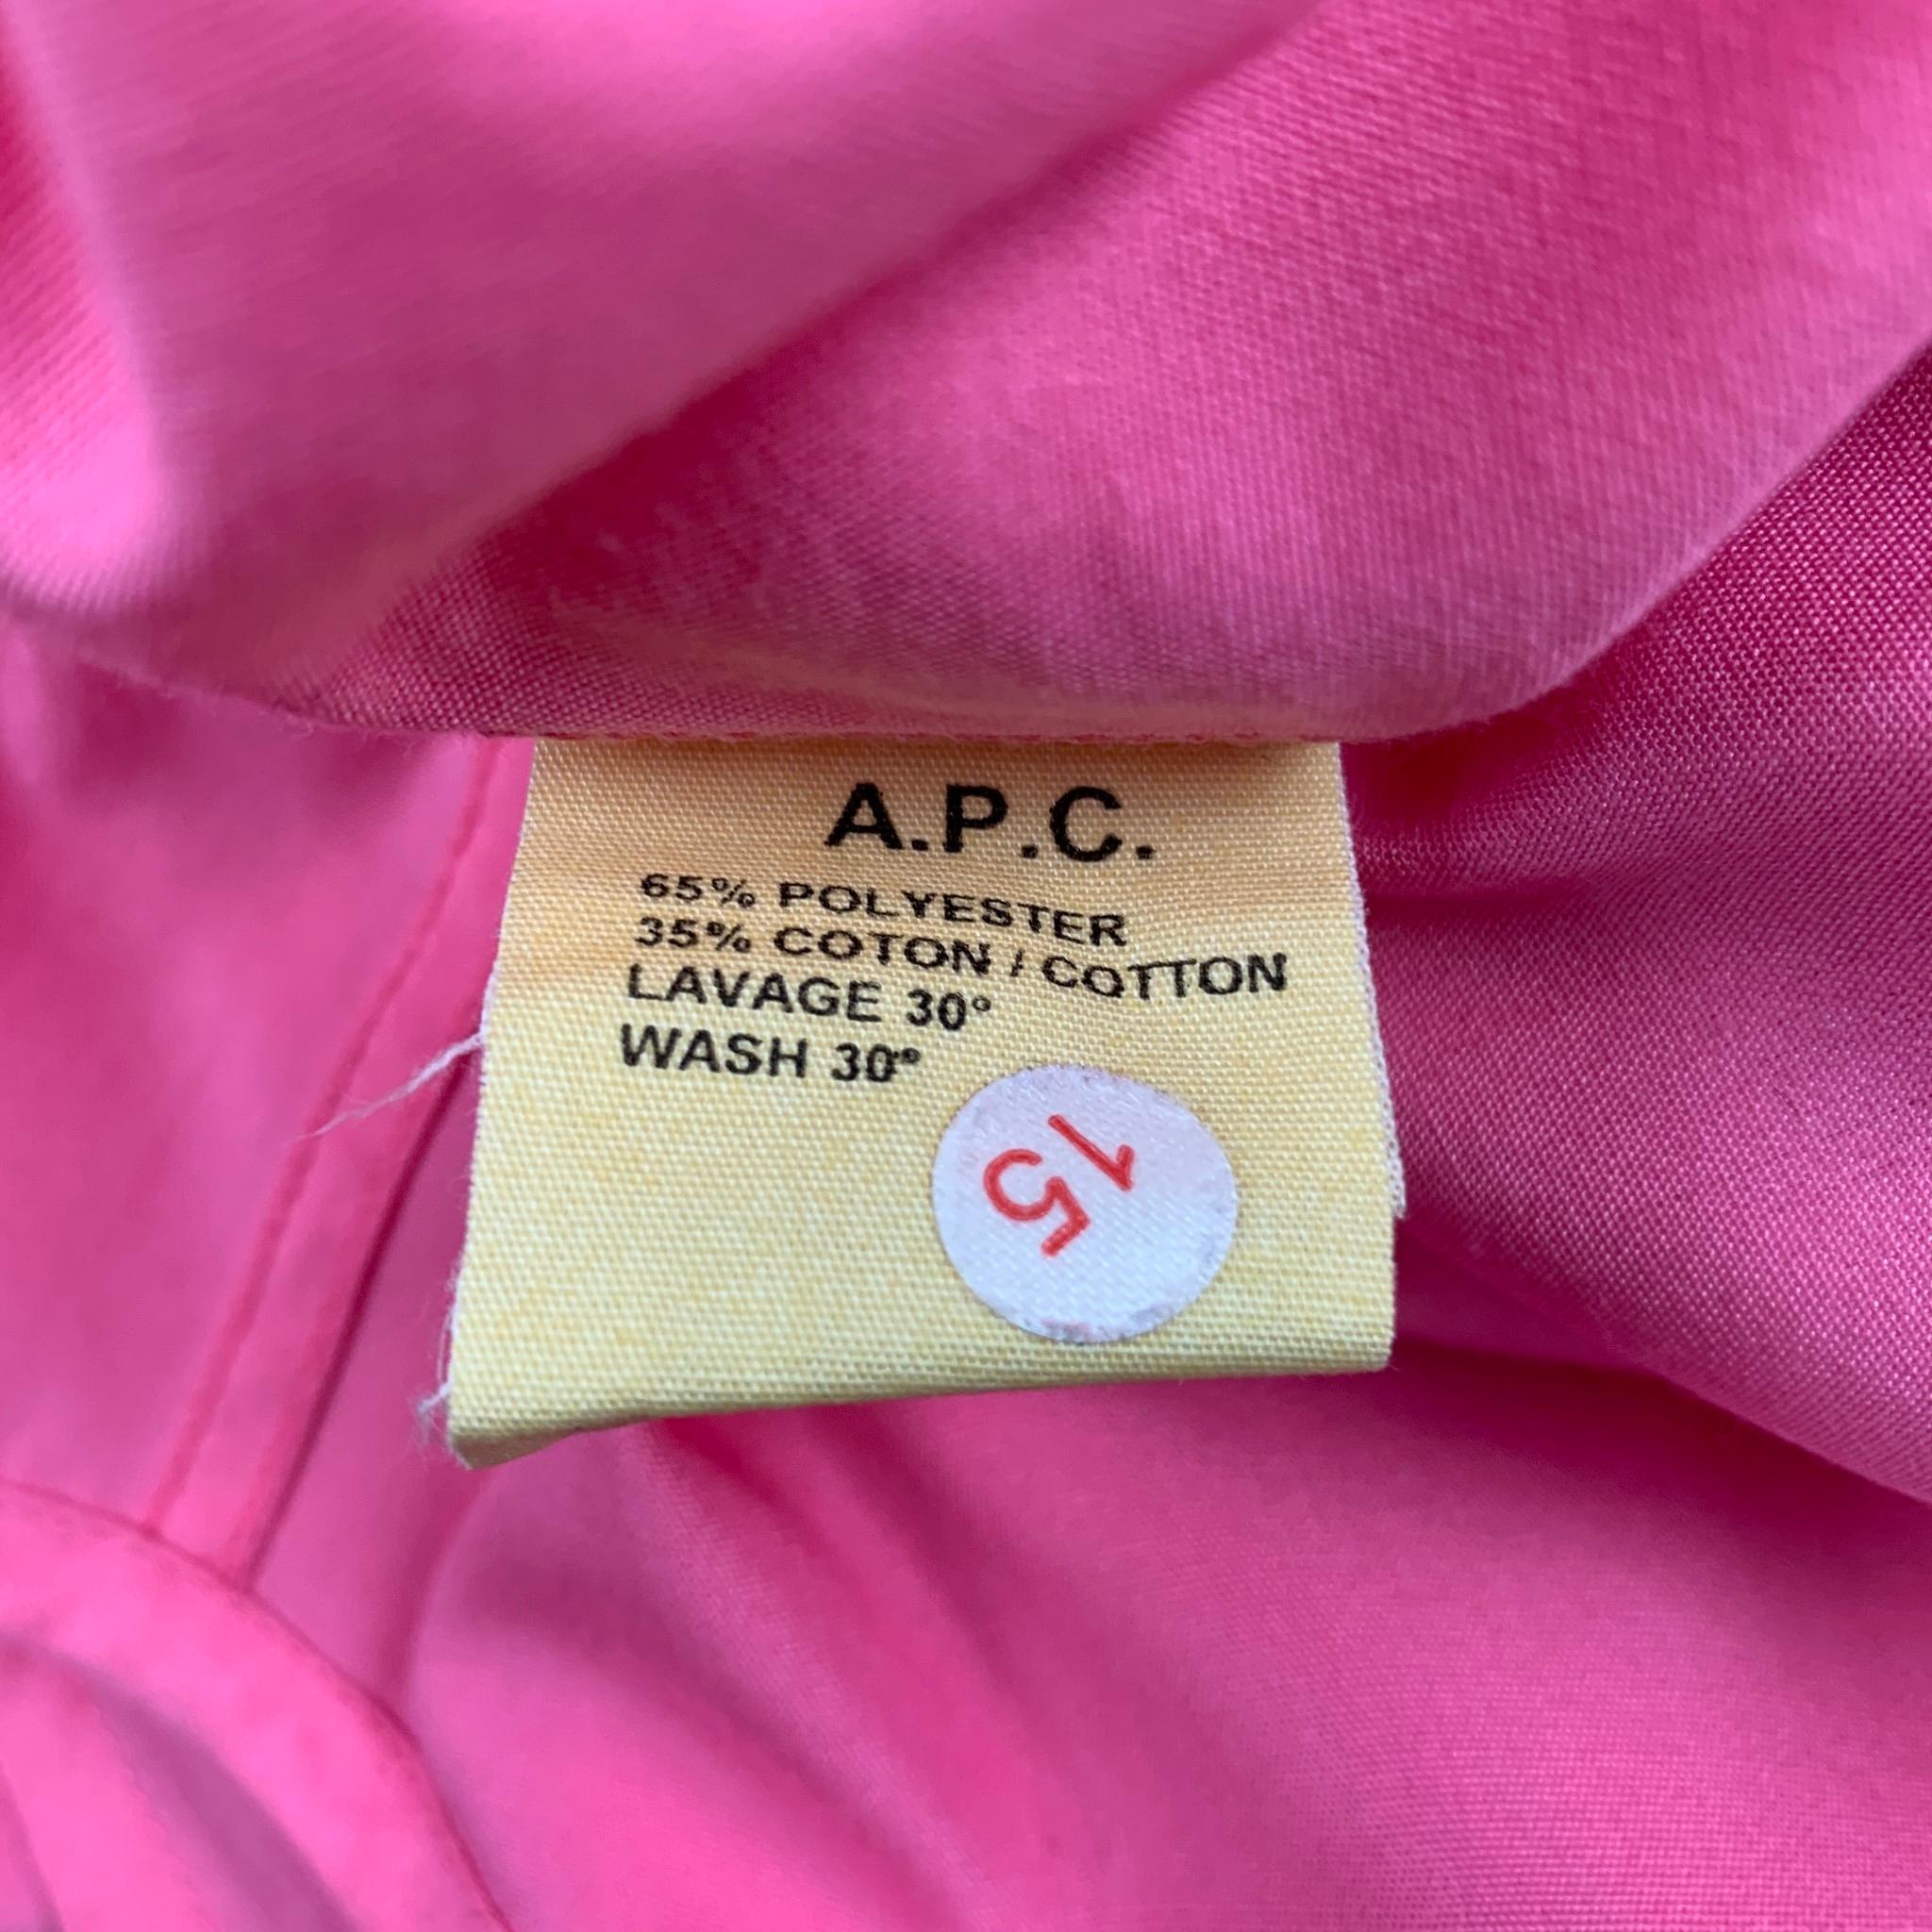 A.P.C long sleeve shirt comes in a pink polyester / cotton featuring a button up style and a spread collar. 

Very Good Pre-Owned Condition.
Marked: S

Measurements:

Shoulder: 17 in.
Chest: 38 in.
Sleeve: 25.5 in.
Length: 30.5 in. 

SKU: